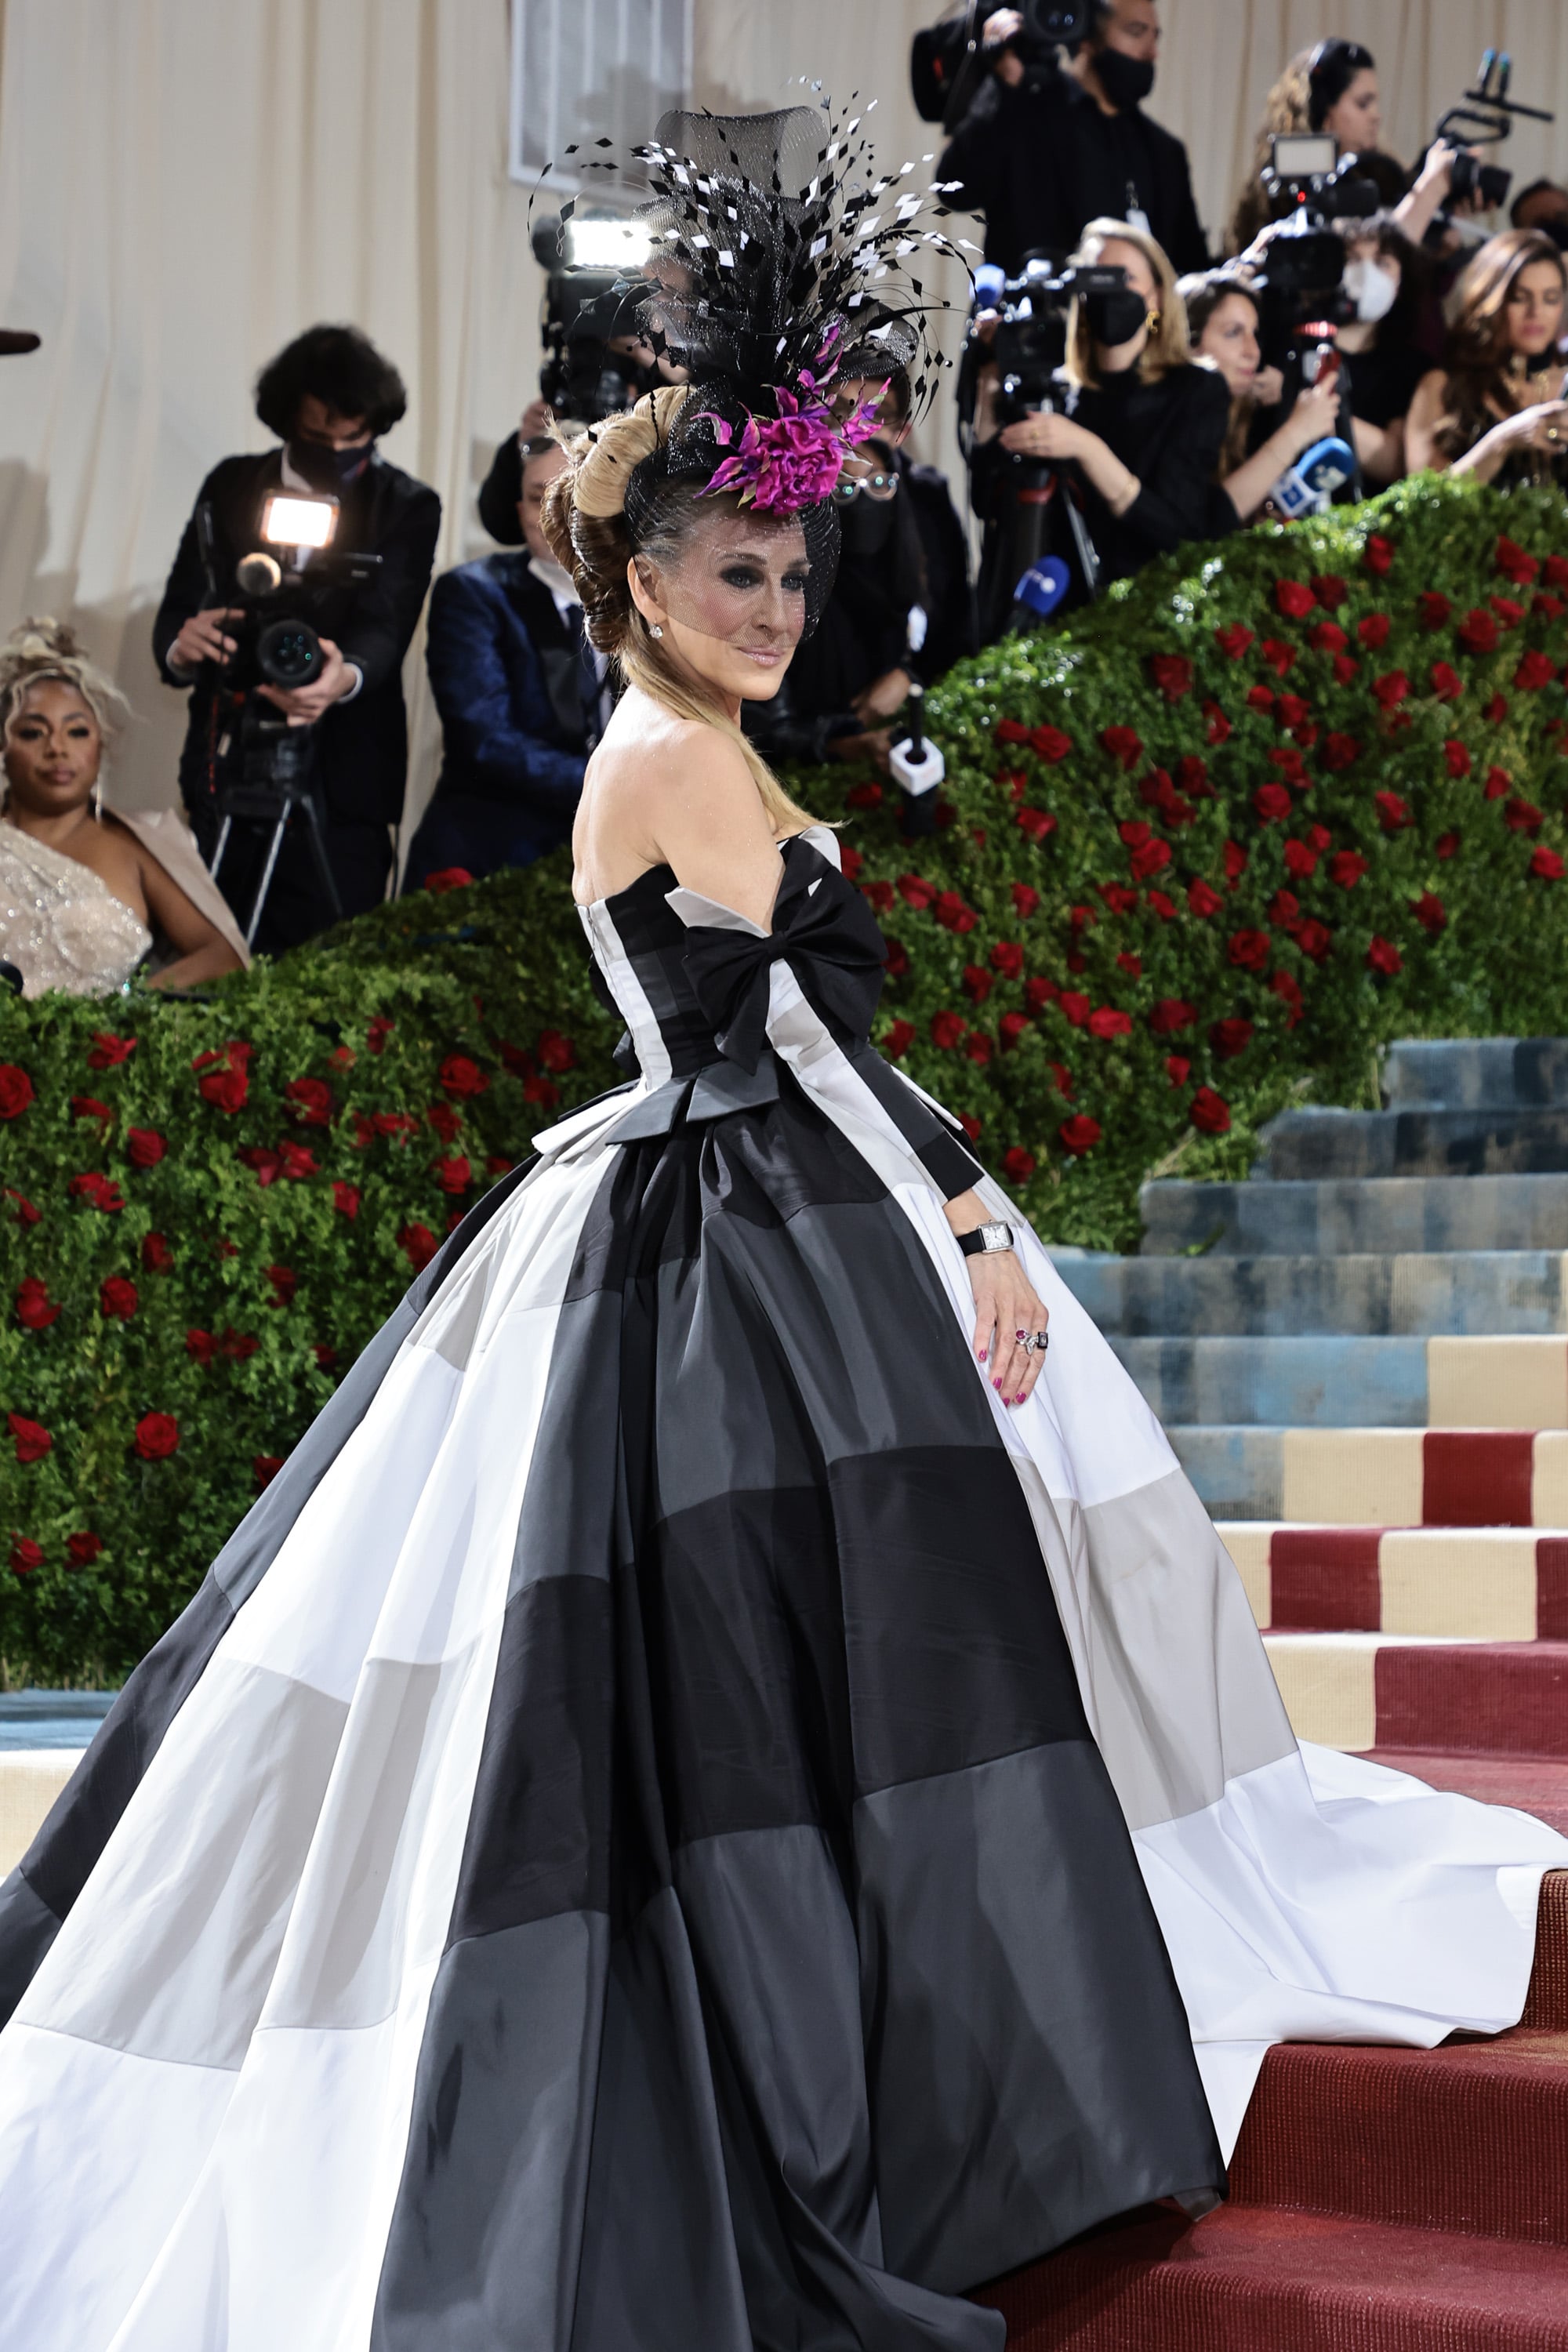 Sarah Jessica Parker's Met Gala Outfits: Photos of Fashion